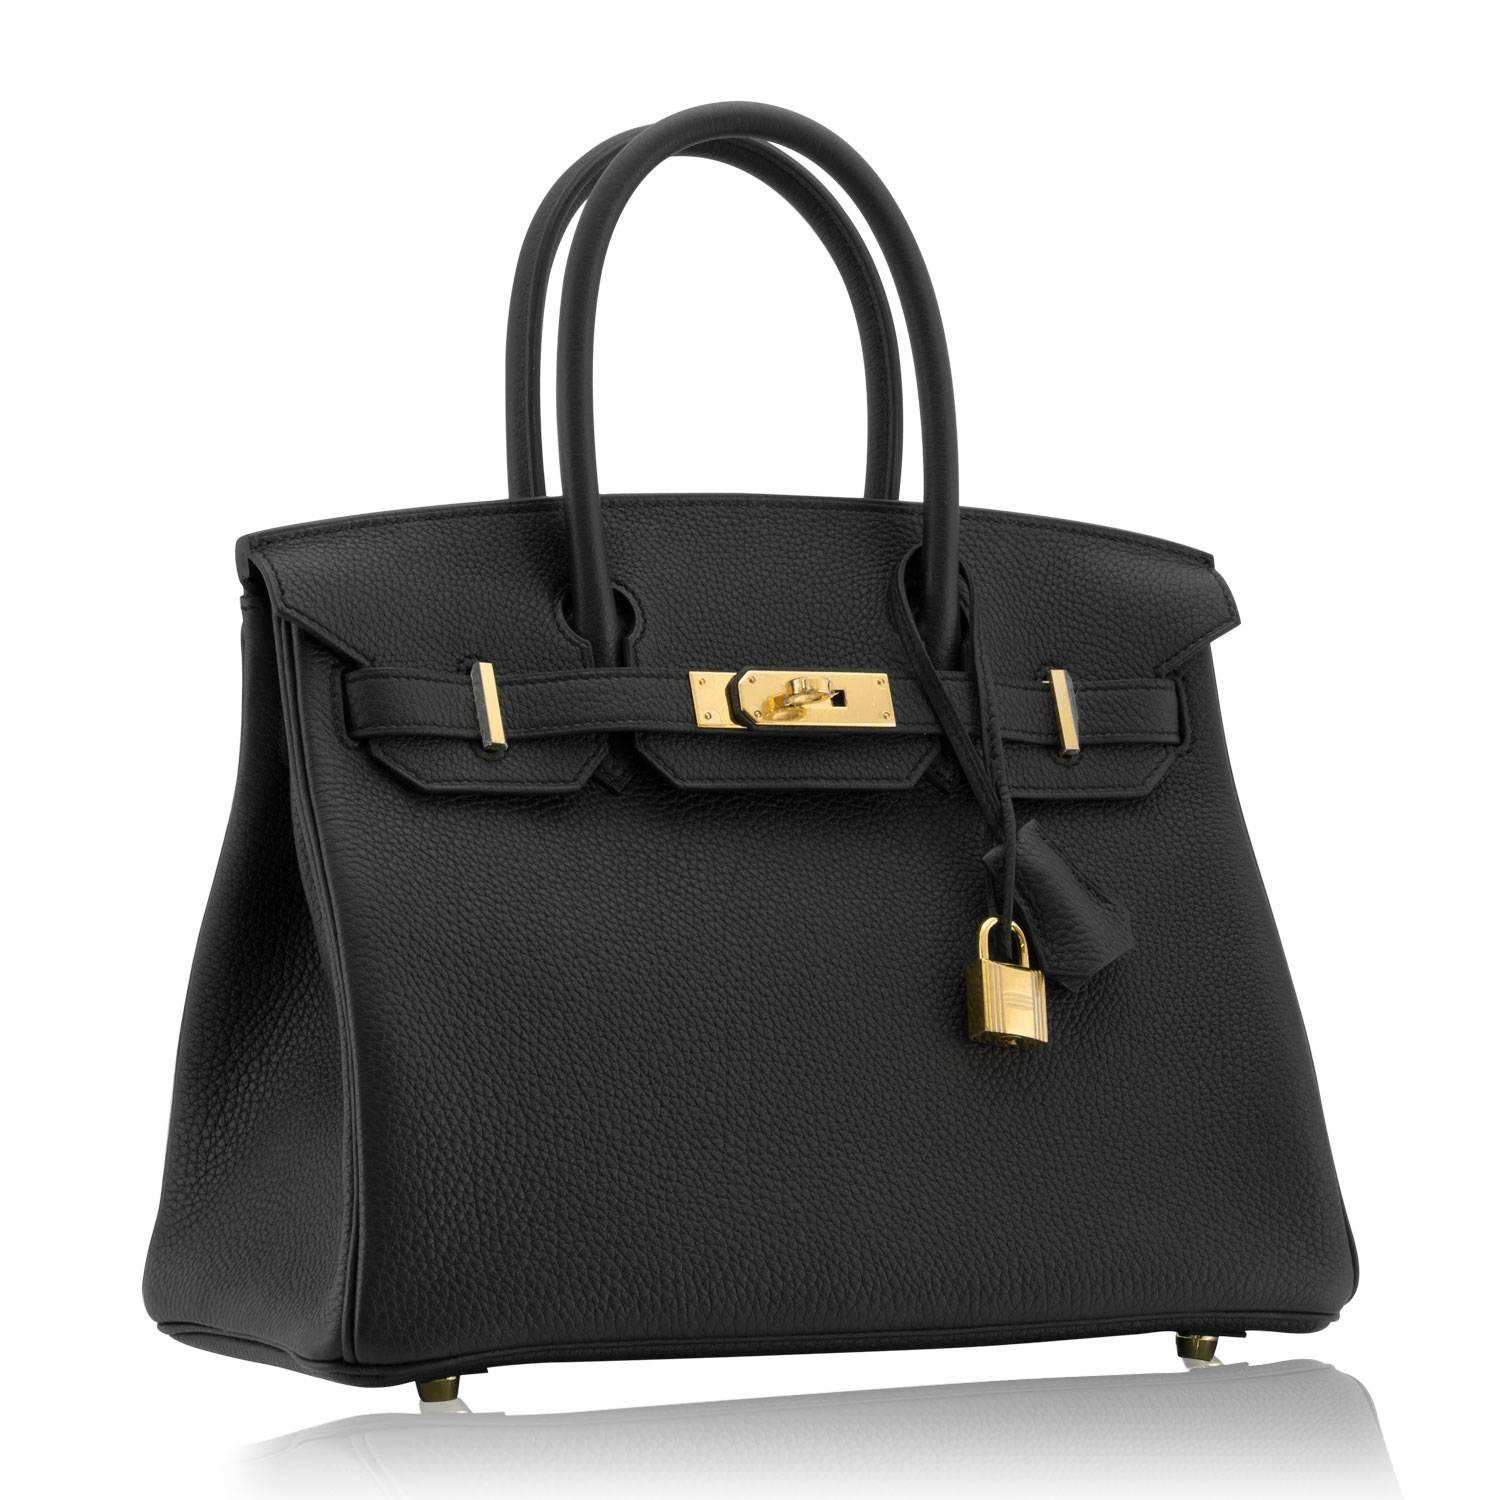 Hermes Birkin 30 Togo Leather 89 Black Color Gold Hardware 2016

Pre-owned and never used.

Bought it in Hermes store in 2016.

Composition: Togo Leather.

Model: Birkin.

Size: 30cm width x 22cm height x 16cm length

Color: 89